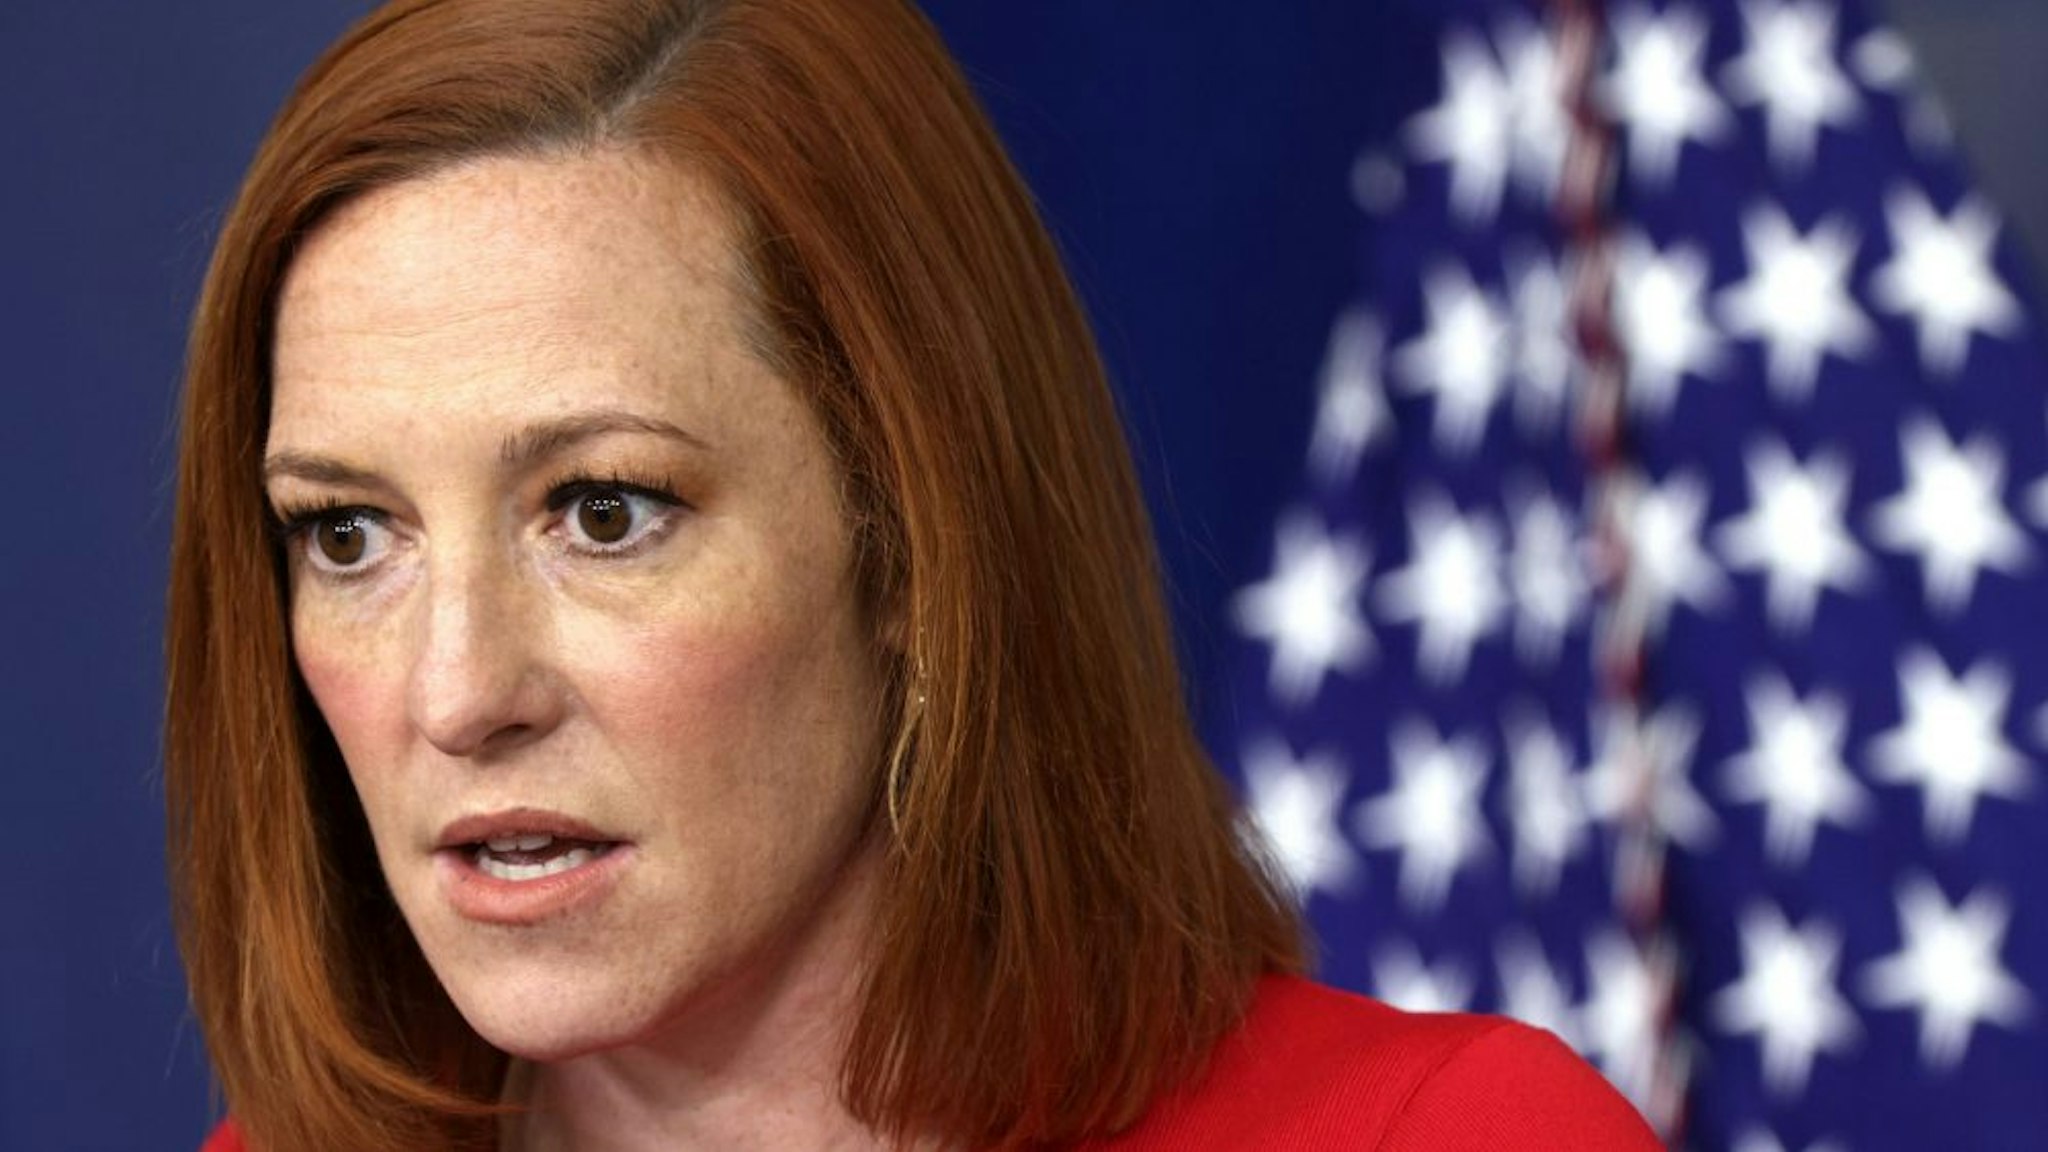 WASHINGTON, DC - APRIL 22: White House Press Secretary Jen Psaki speaks during a daily press briefing at the James Brady Press Briefing Room of the White House April 22, 2021 in Washington, DC. Psaki held the daily press briefing to discuss various topics including the virtual Leaders Summit on Climate with 40 world leaders that was held by the White House today.